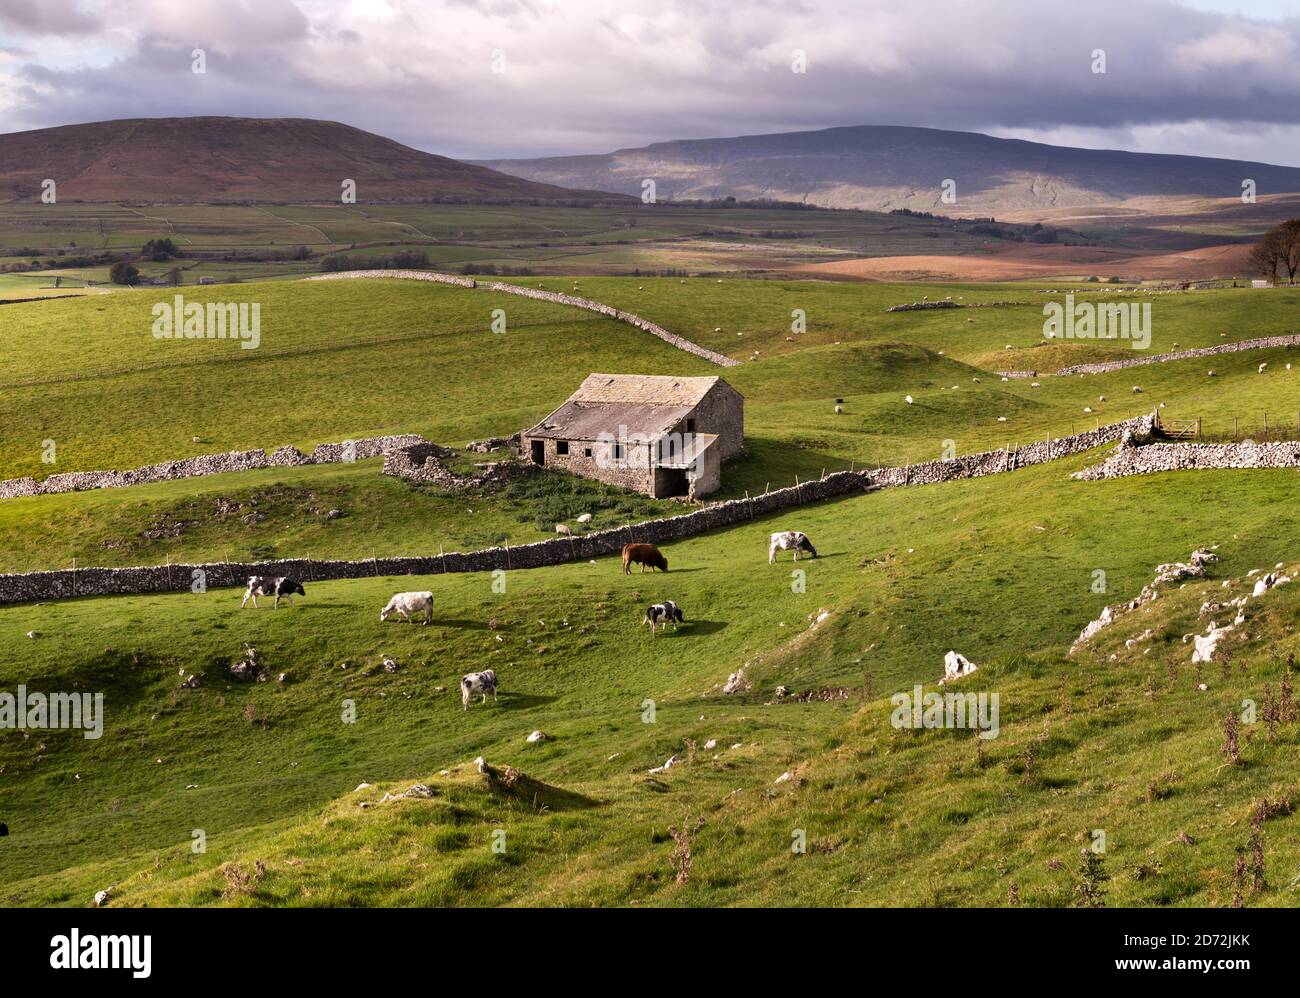 Cattle graze next to a traditional stone barn in Upper Ribblesdale, near Horton-in-Ribblesdale, Yorkshire Dales National Park, UK. Stock Photo